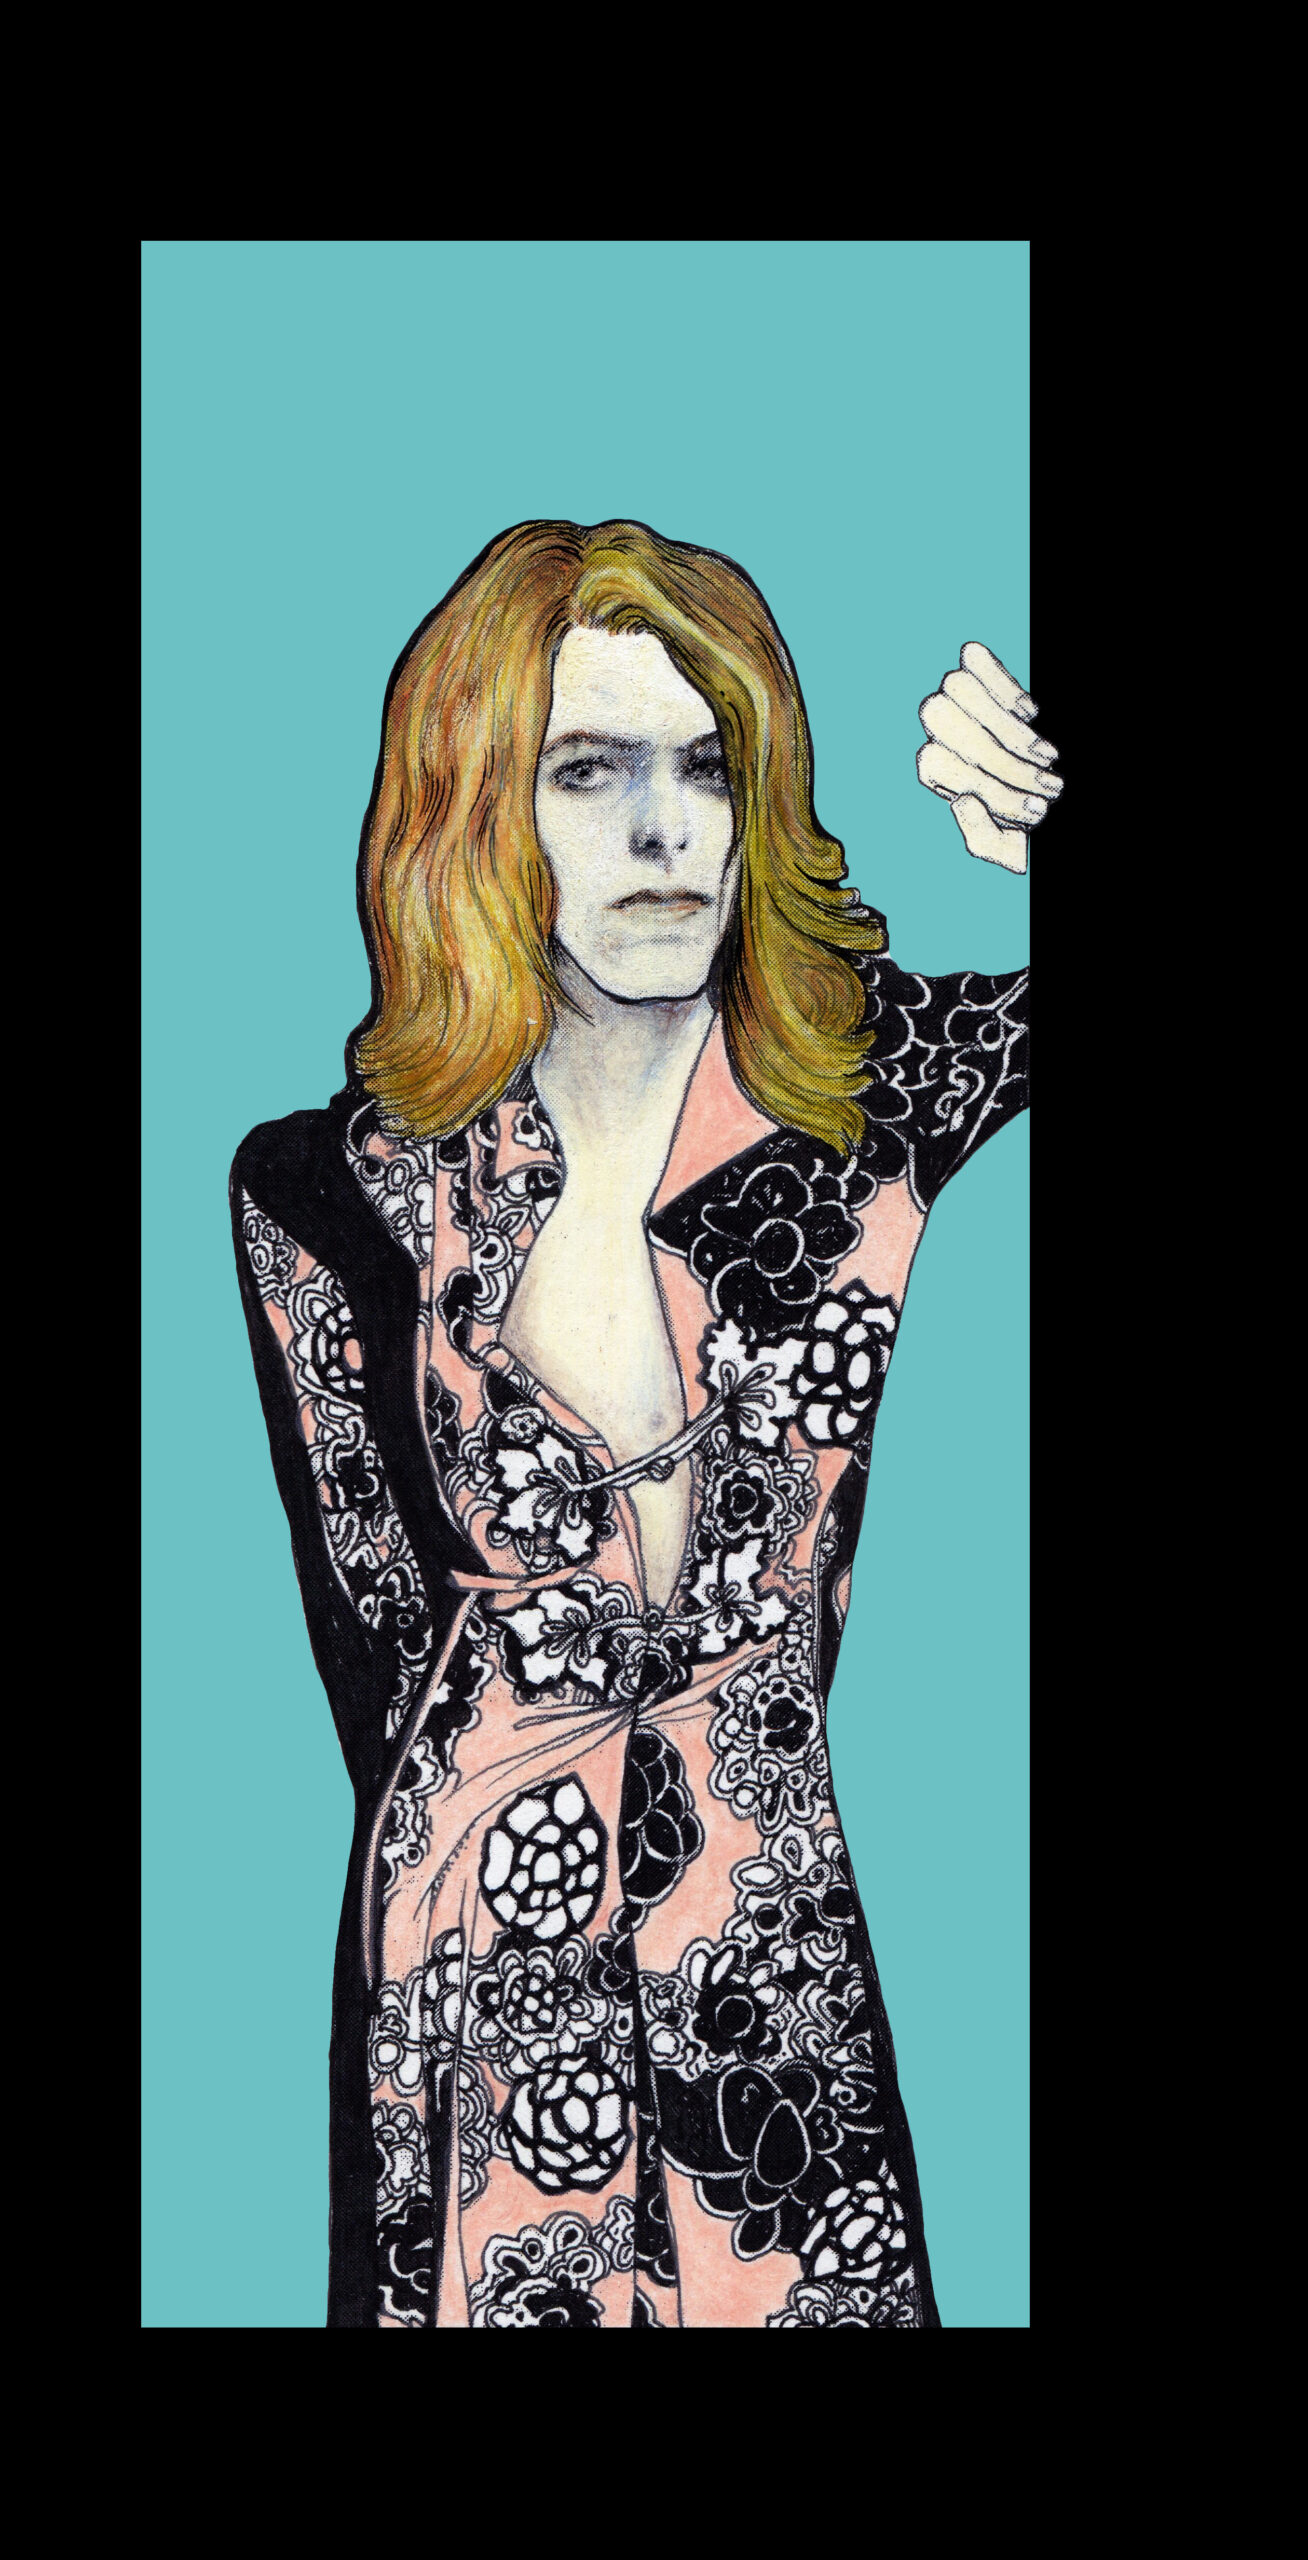 bowie - hunky dory